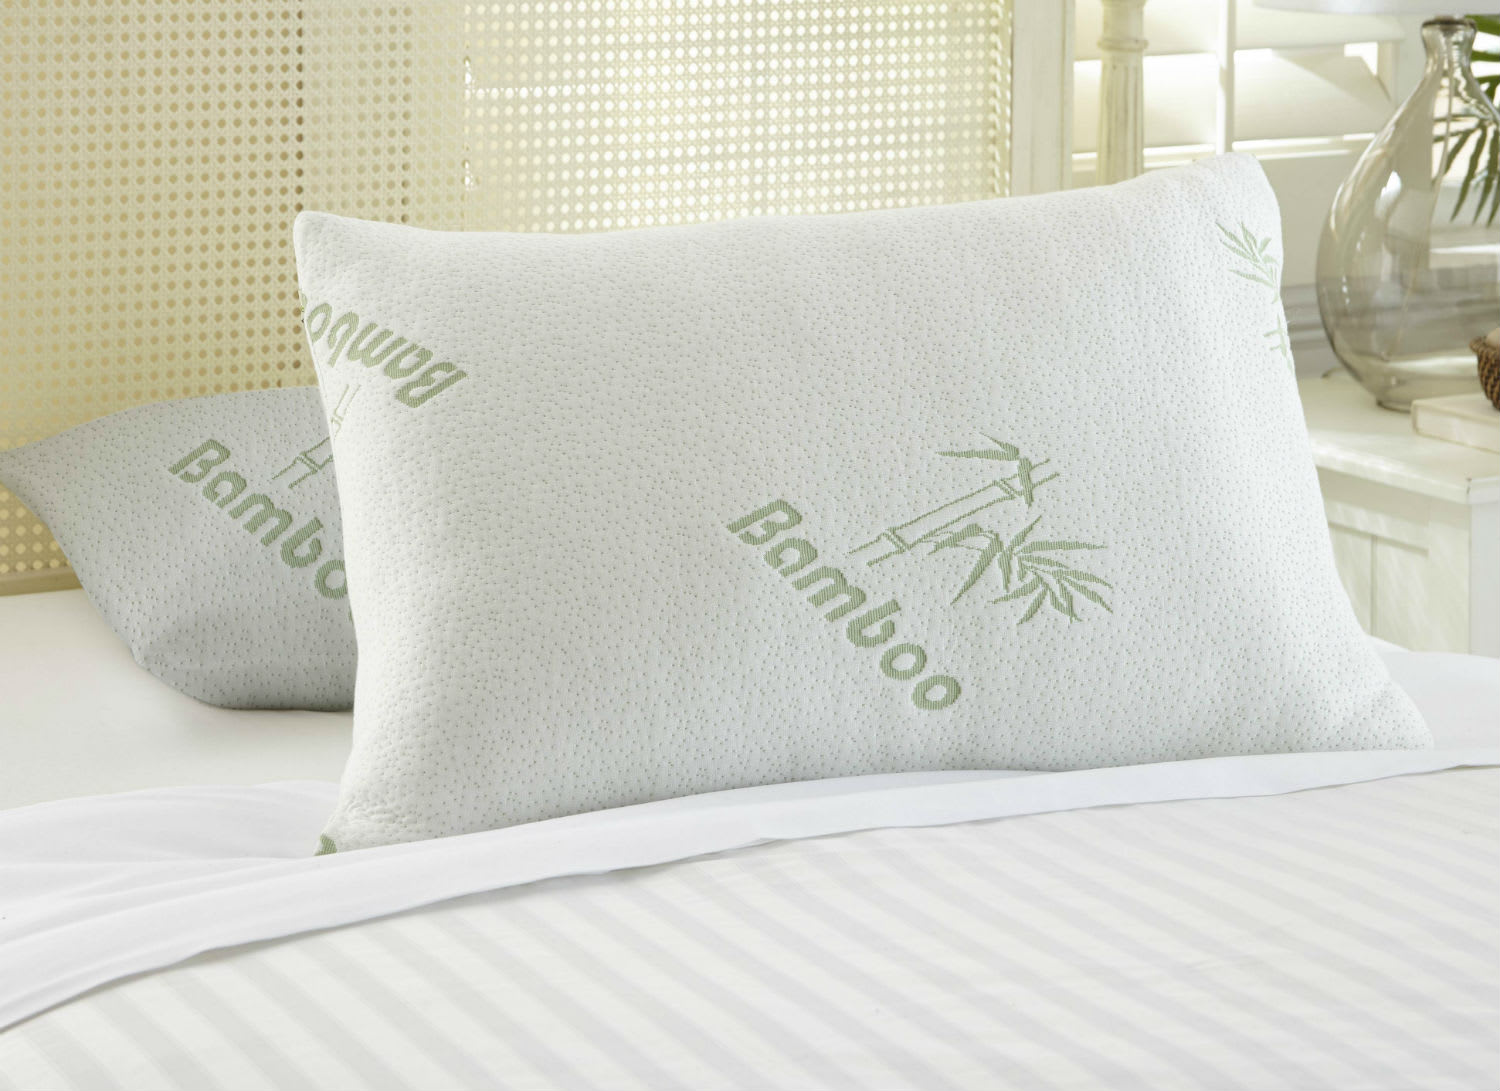 5 Best Bamboo Pillow Options for Hot Sleepers - Best Picks!